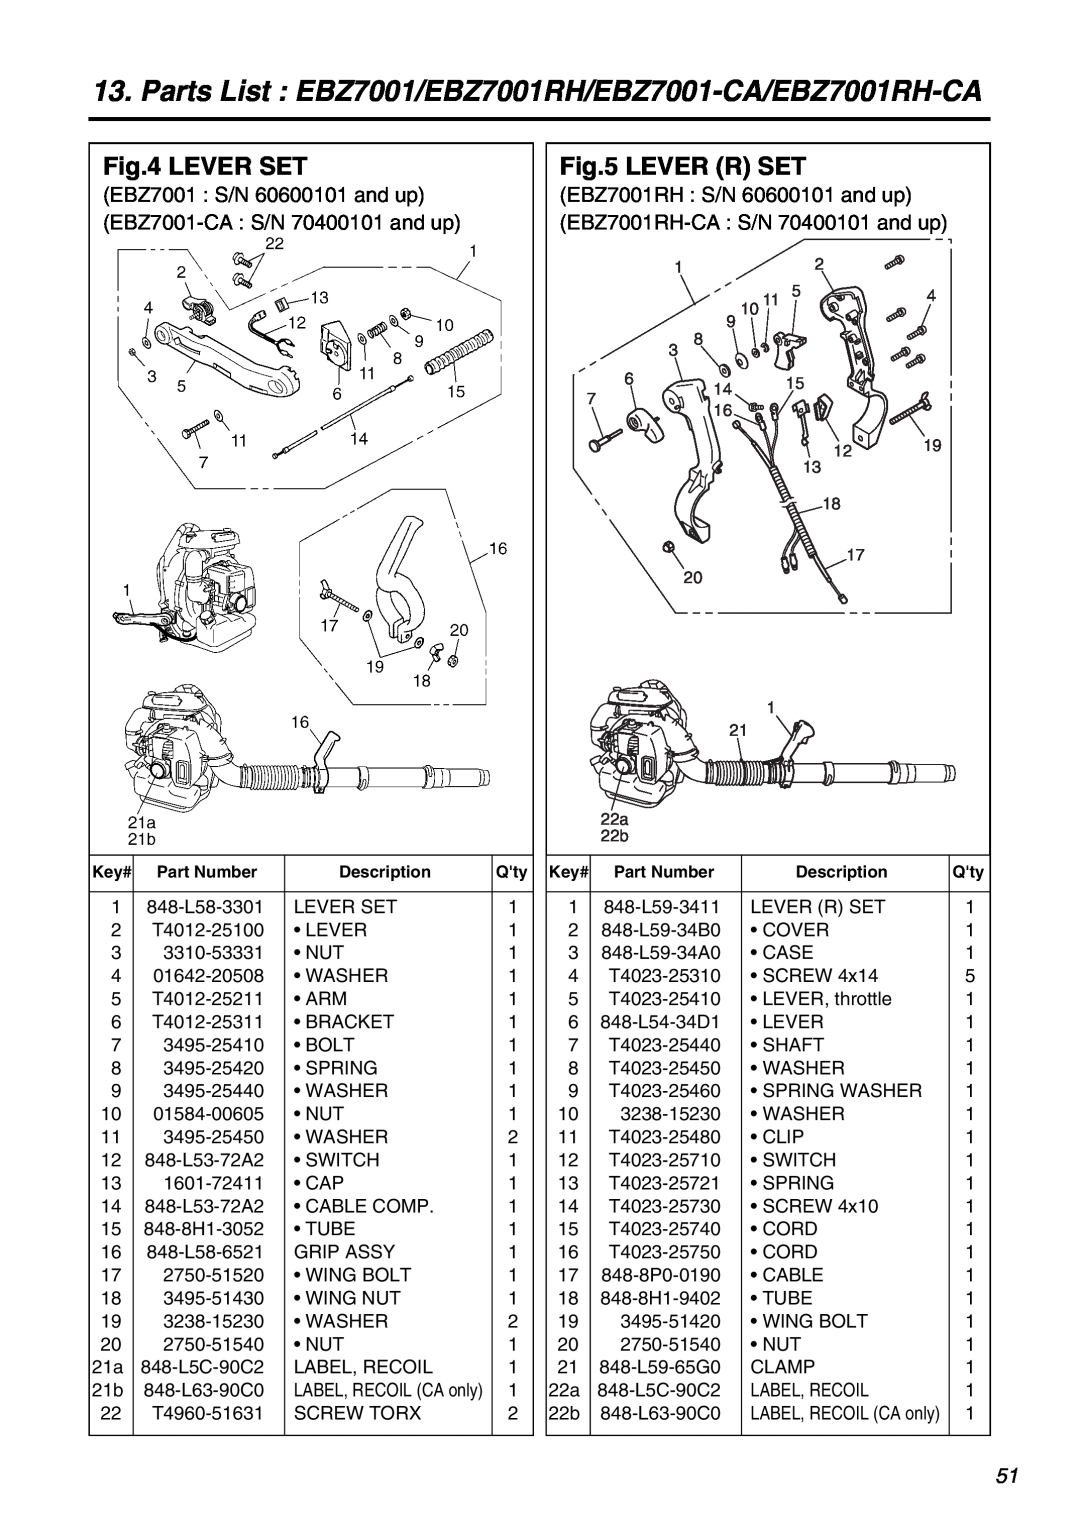 RedMax EBZ7001RH-CA manual Lever Set, Lever R Set, EBZ7001 S/N 60600101 and up EBZ7001-CA S/N 70400101 and up 